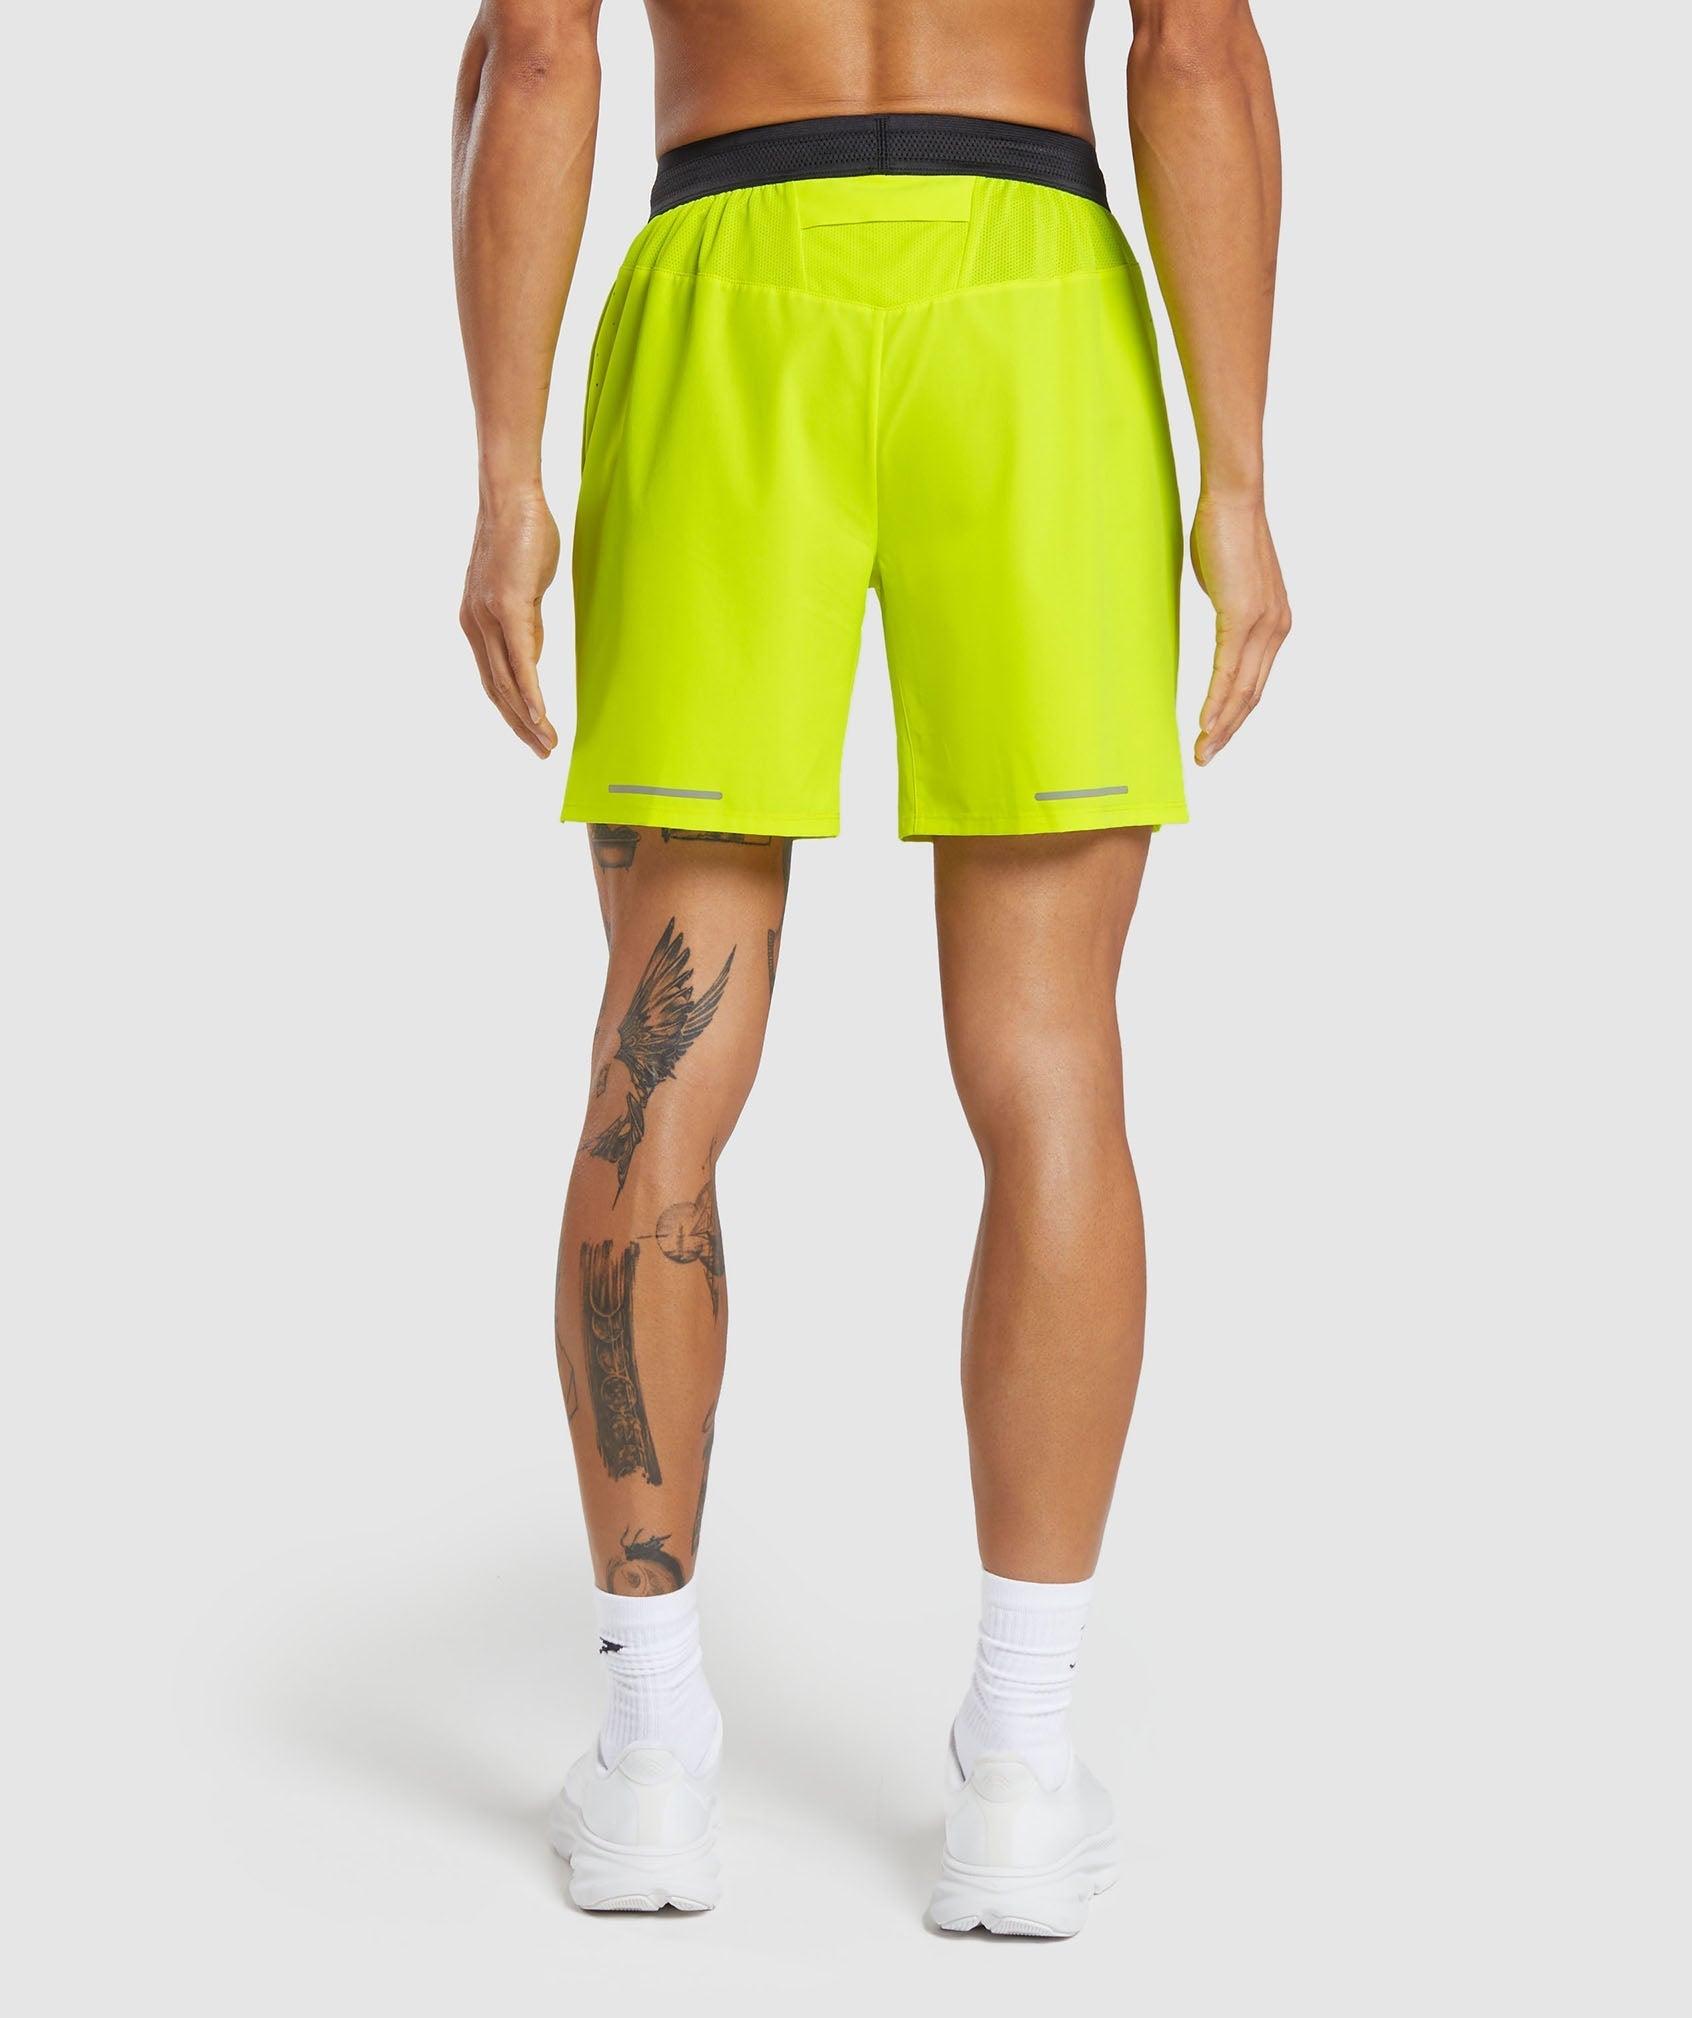 Speed 7" Shorts in Green - view 3